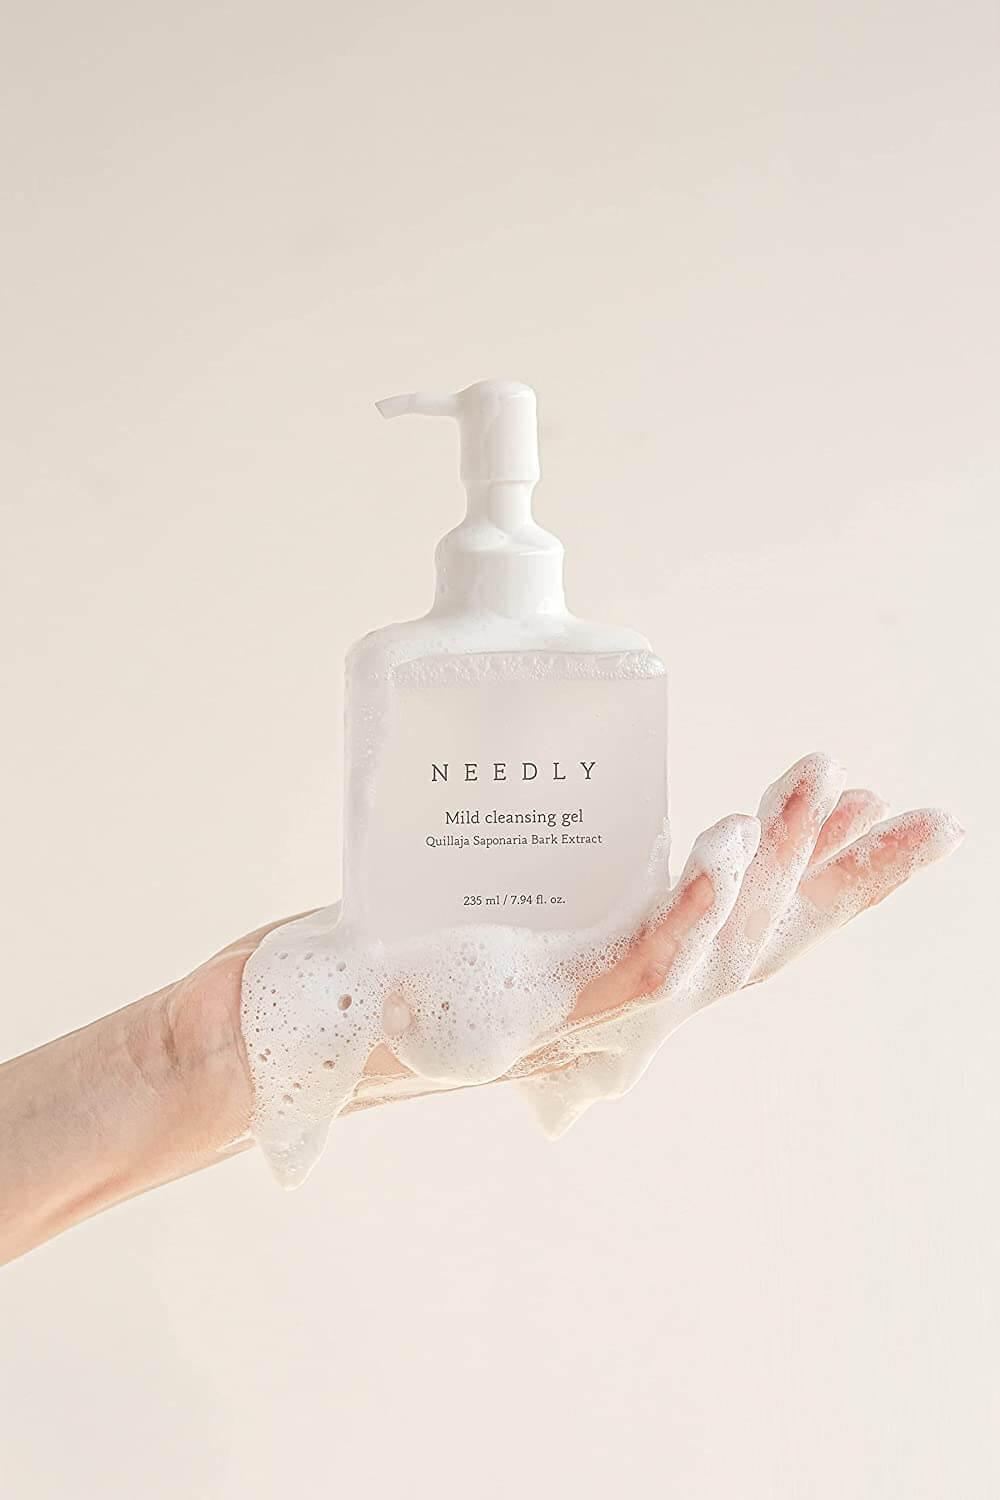 NEEDLY - Mild Cleansing Gel from NEEDLY